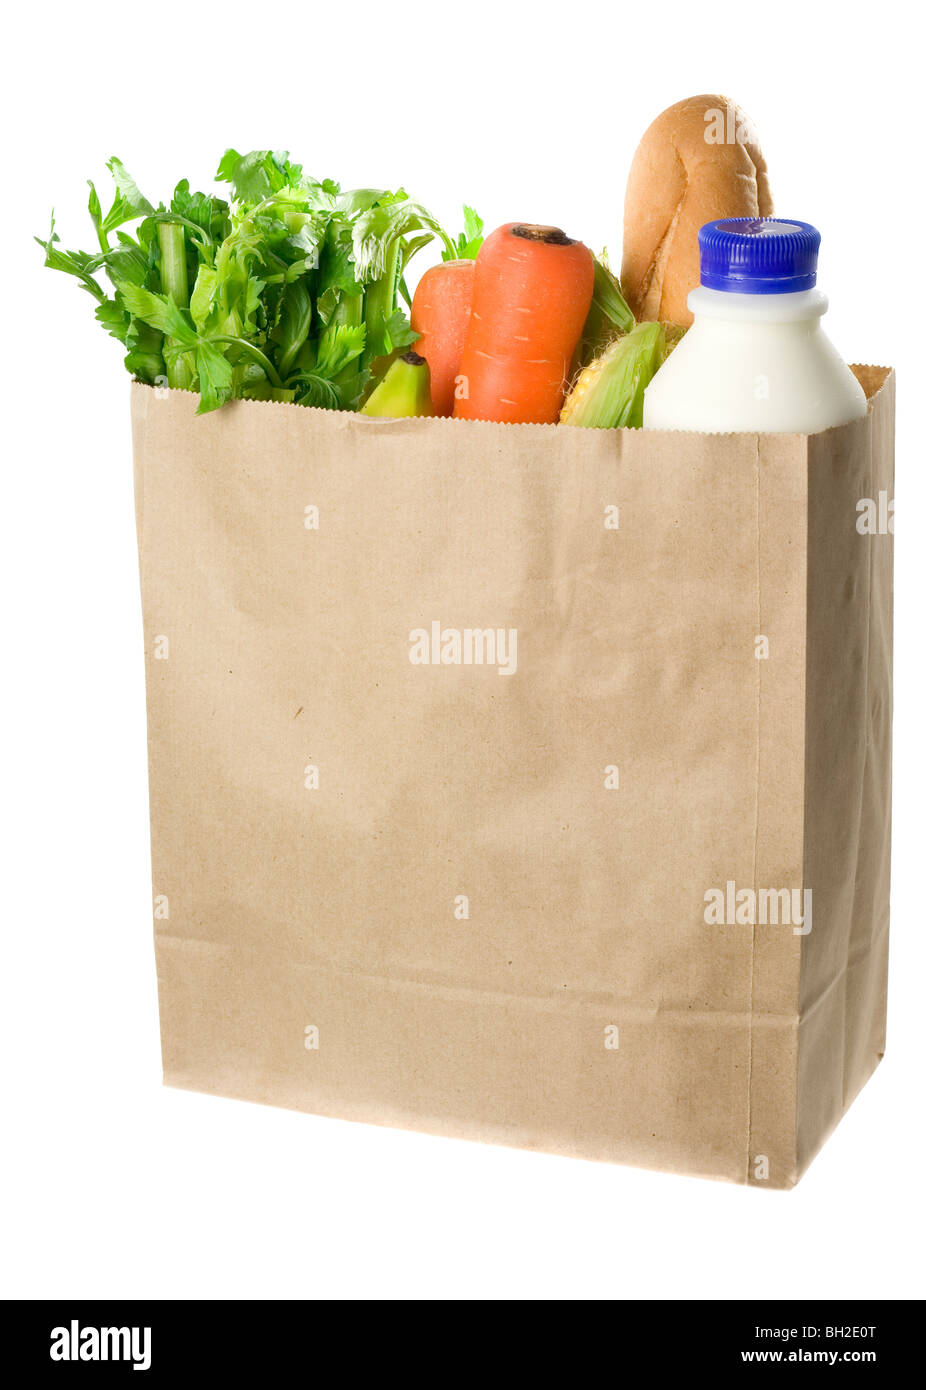 Paper bag full of groceries isolated on white background Stock Photo